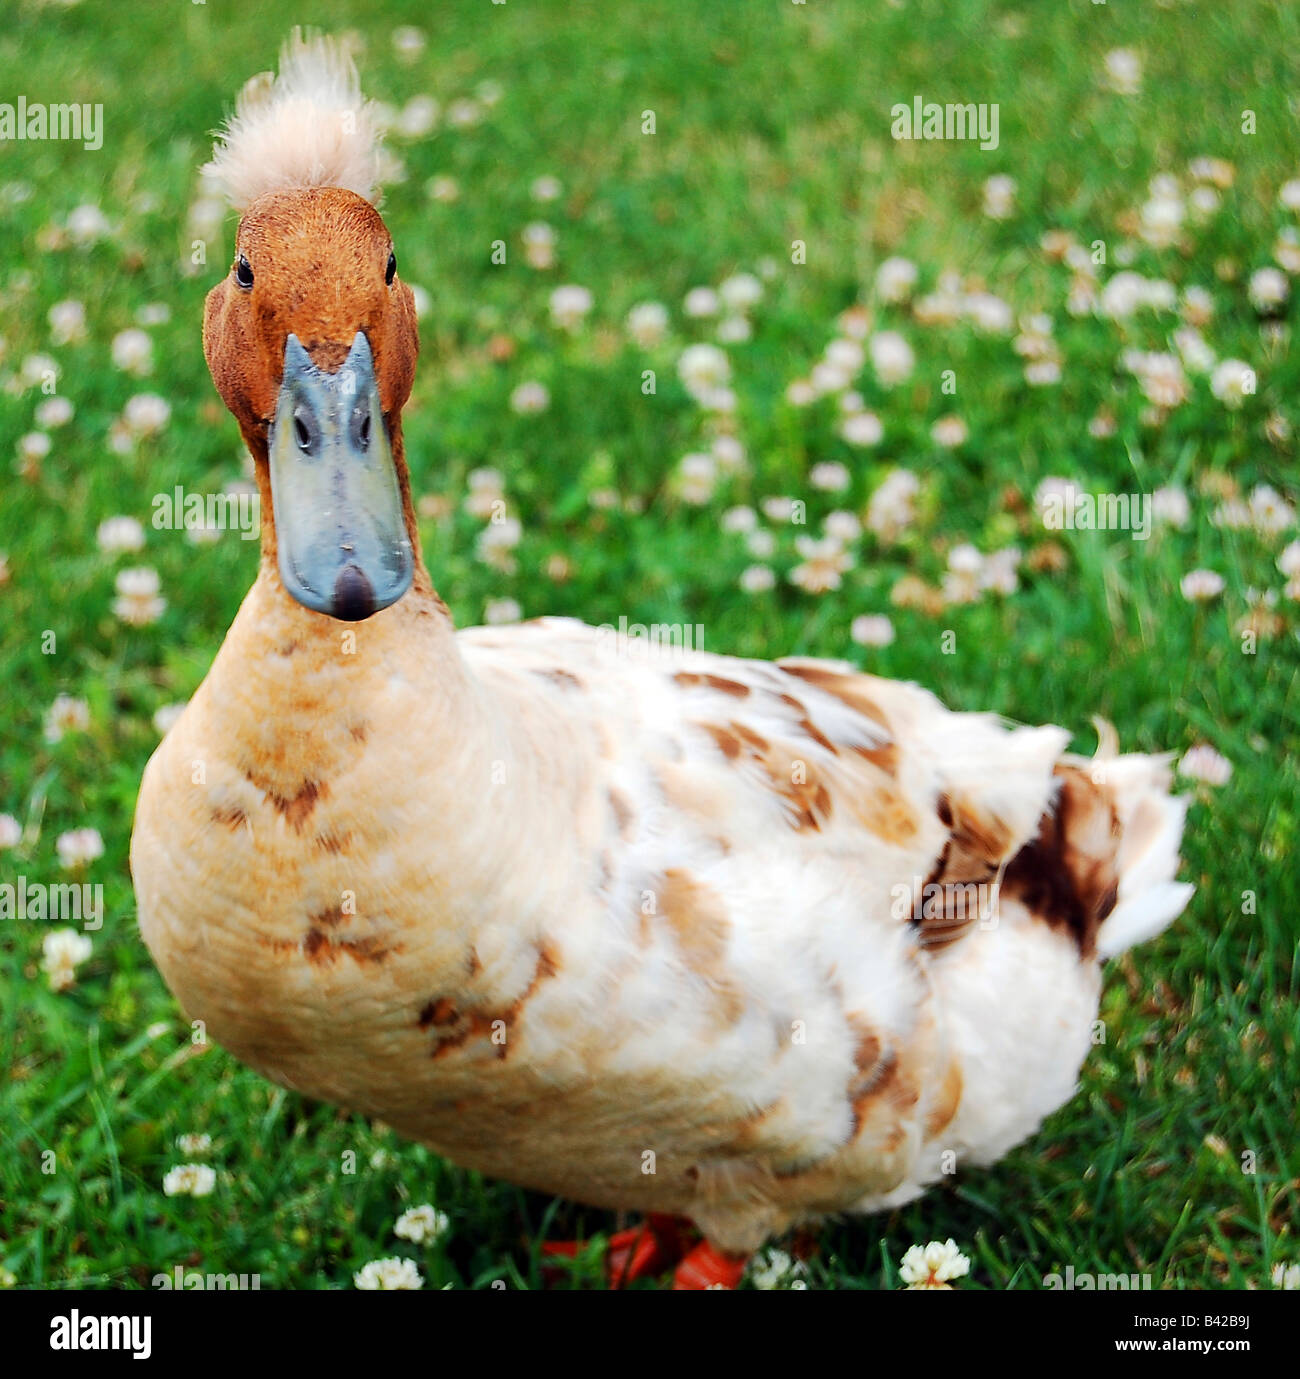 Funny looking duck with Don King hair style in a grass field with dandelions. Stock Photo